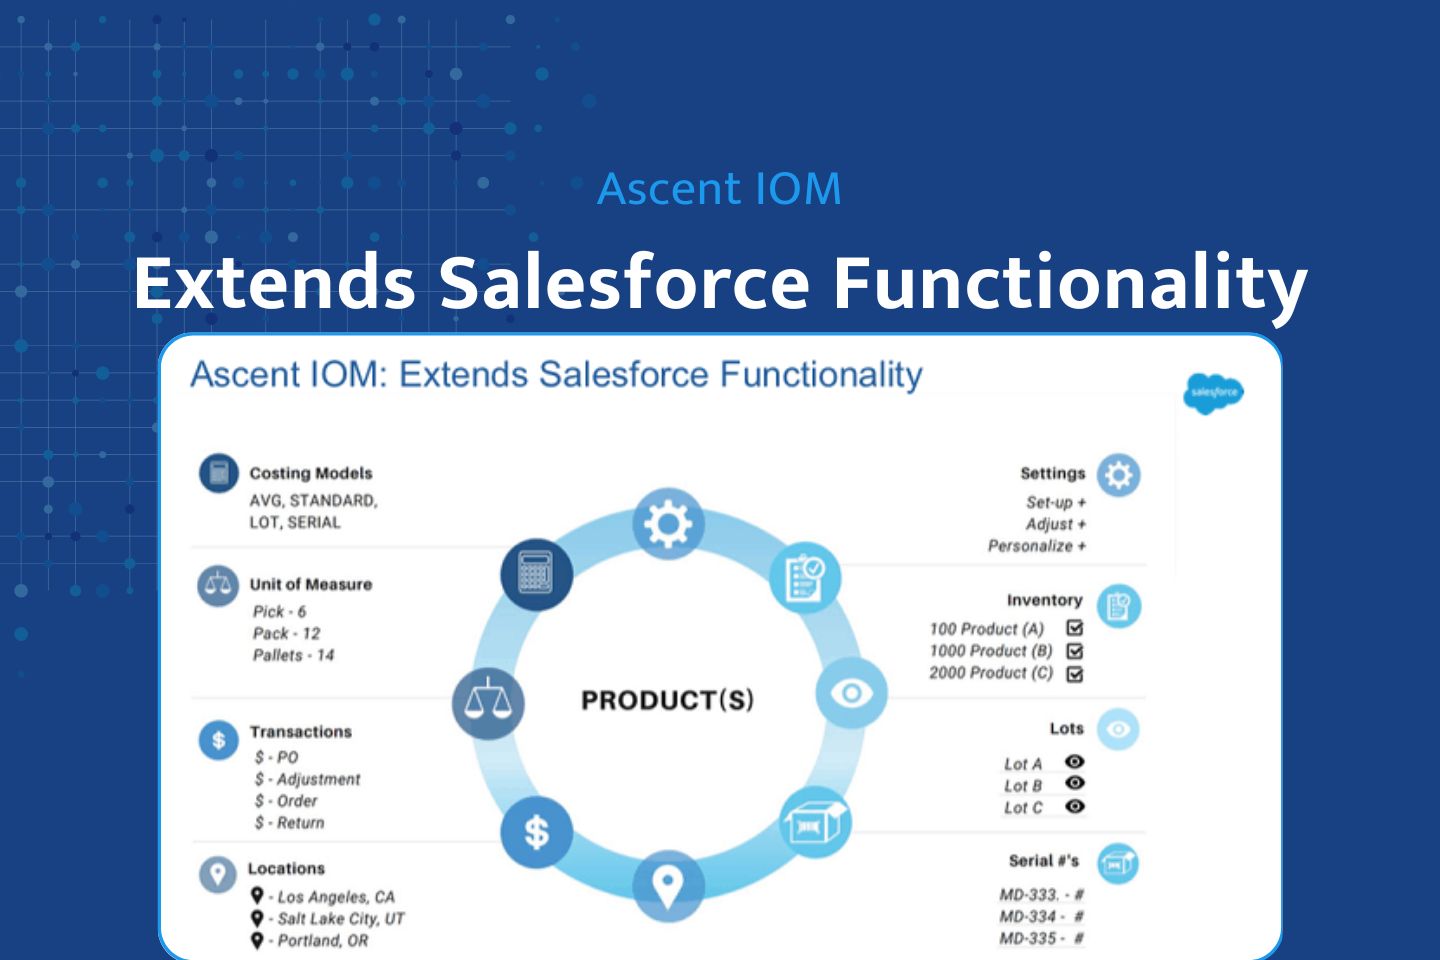 Ascent IOM Extends Salesforce Functionality